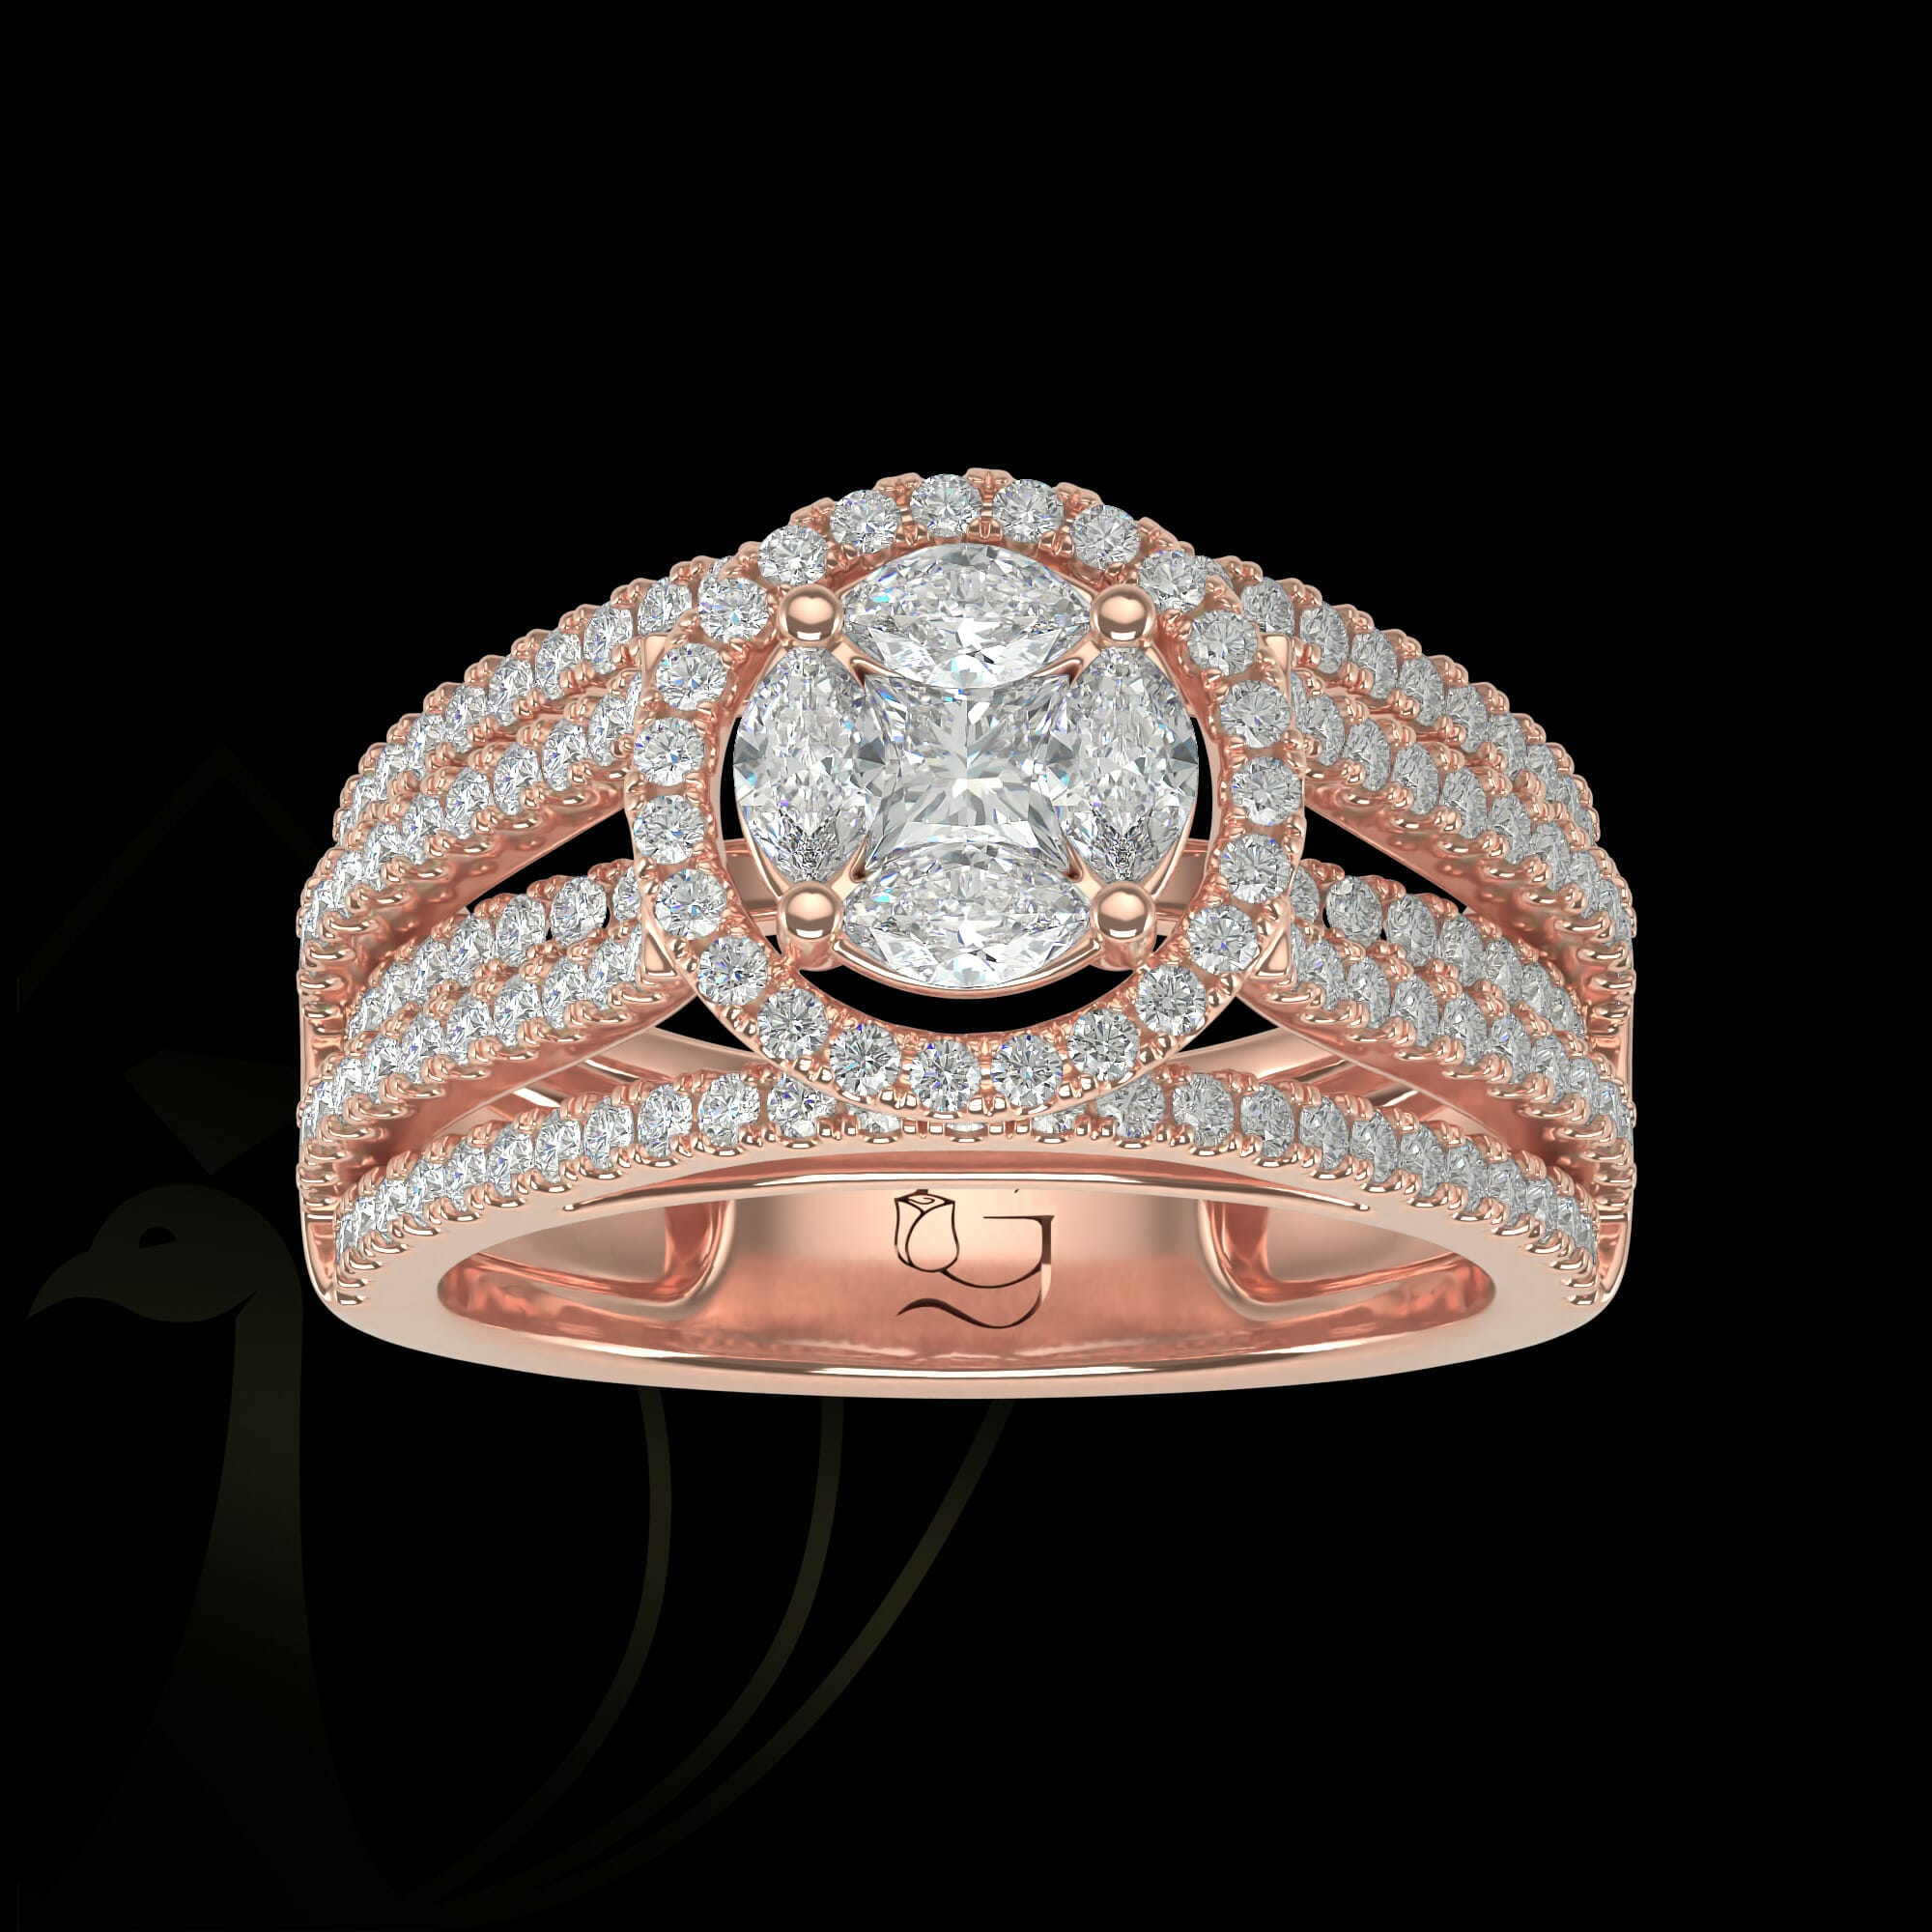 The rays of happiness diamond ring in trendy rose gold.